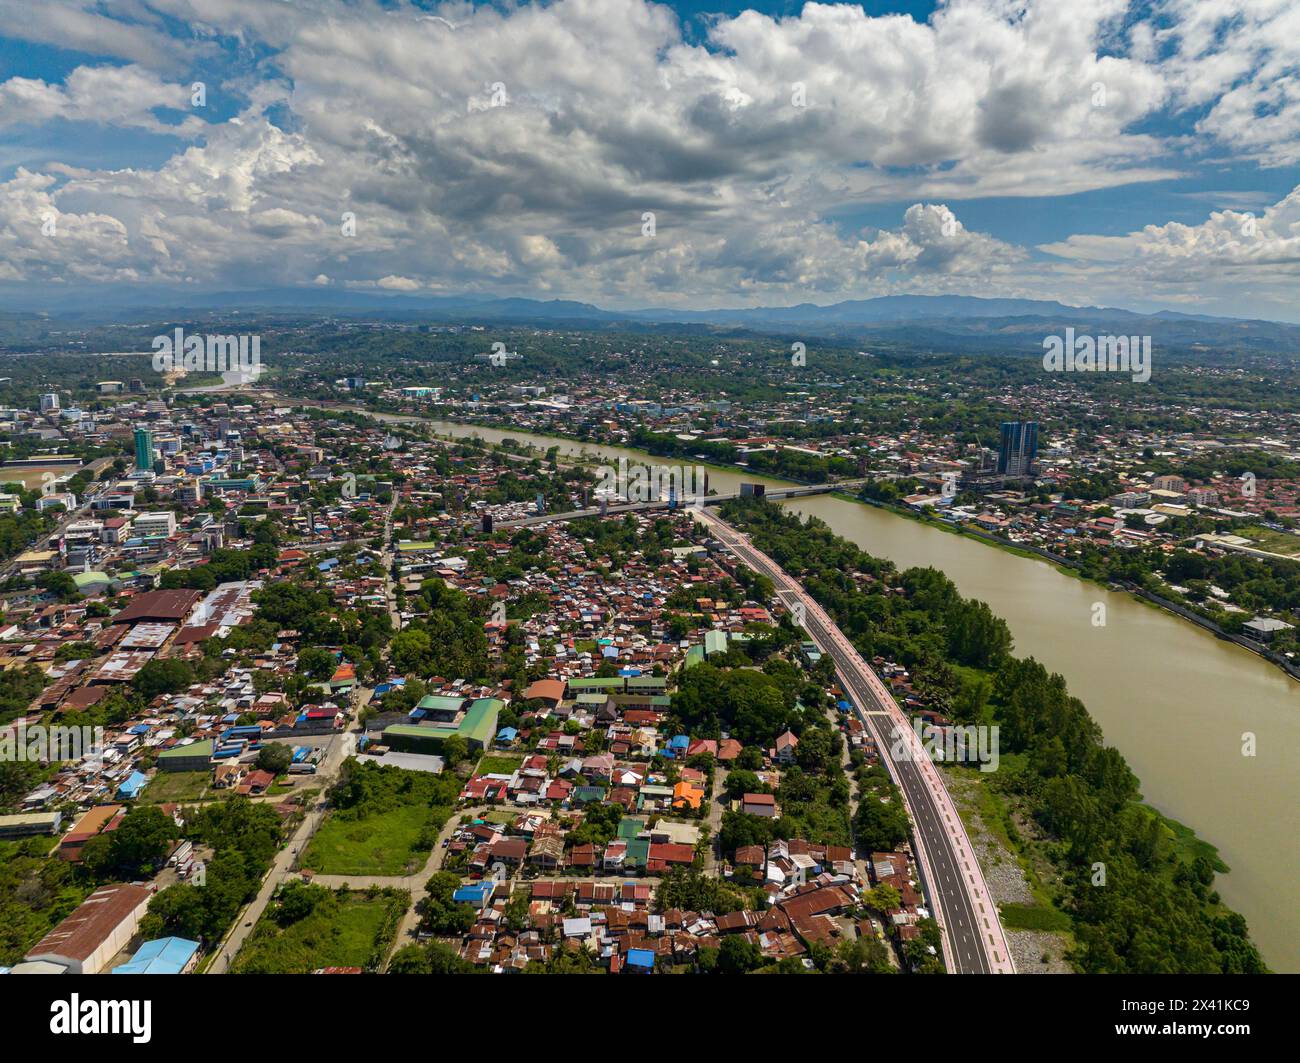 River and residential area in Cagayan de Oro in Northern Mindanao, Philippines. Stock Photo